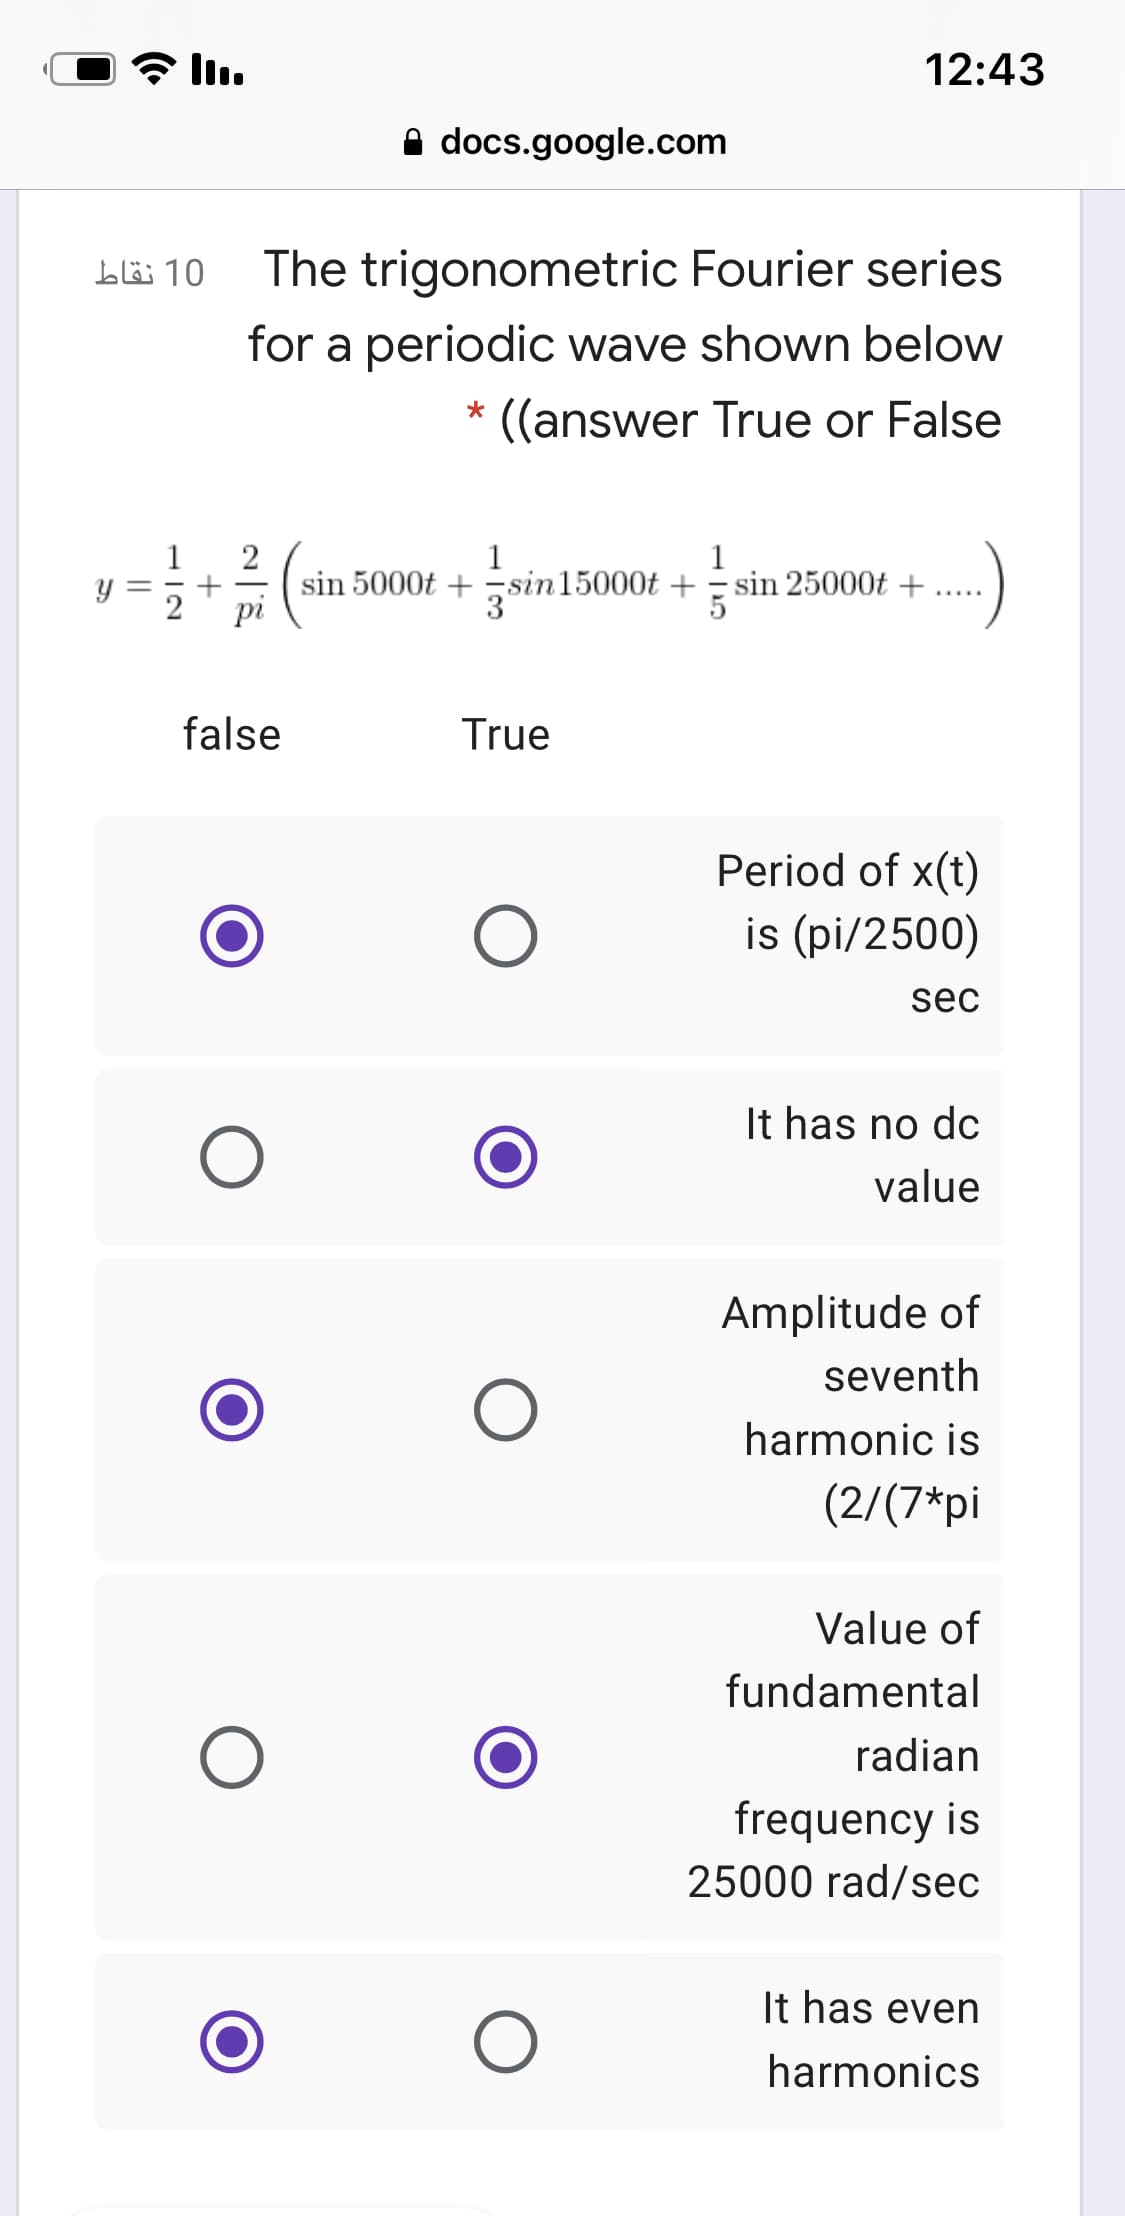 12:43
A docs.google.com
10 نقاط
The trigonometric Fourier series
for a periodic wave shown below
((answer True or False
2
sin 5000t + -sin15000t + = sin 25000t +
1
1
1
jsin!
%3|
false
True
Period of x(t)
is (pi/2500)
sec
It has no dc
value
Amplitude of
seventh
harmonic is
(2/(7*pi
Value of
fundamental
radian
frequency is
25000 rad/sec
It has even
harmonics
